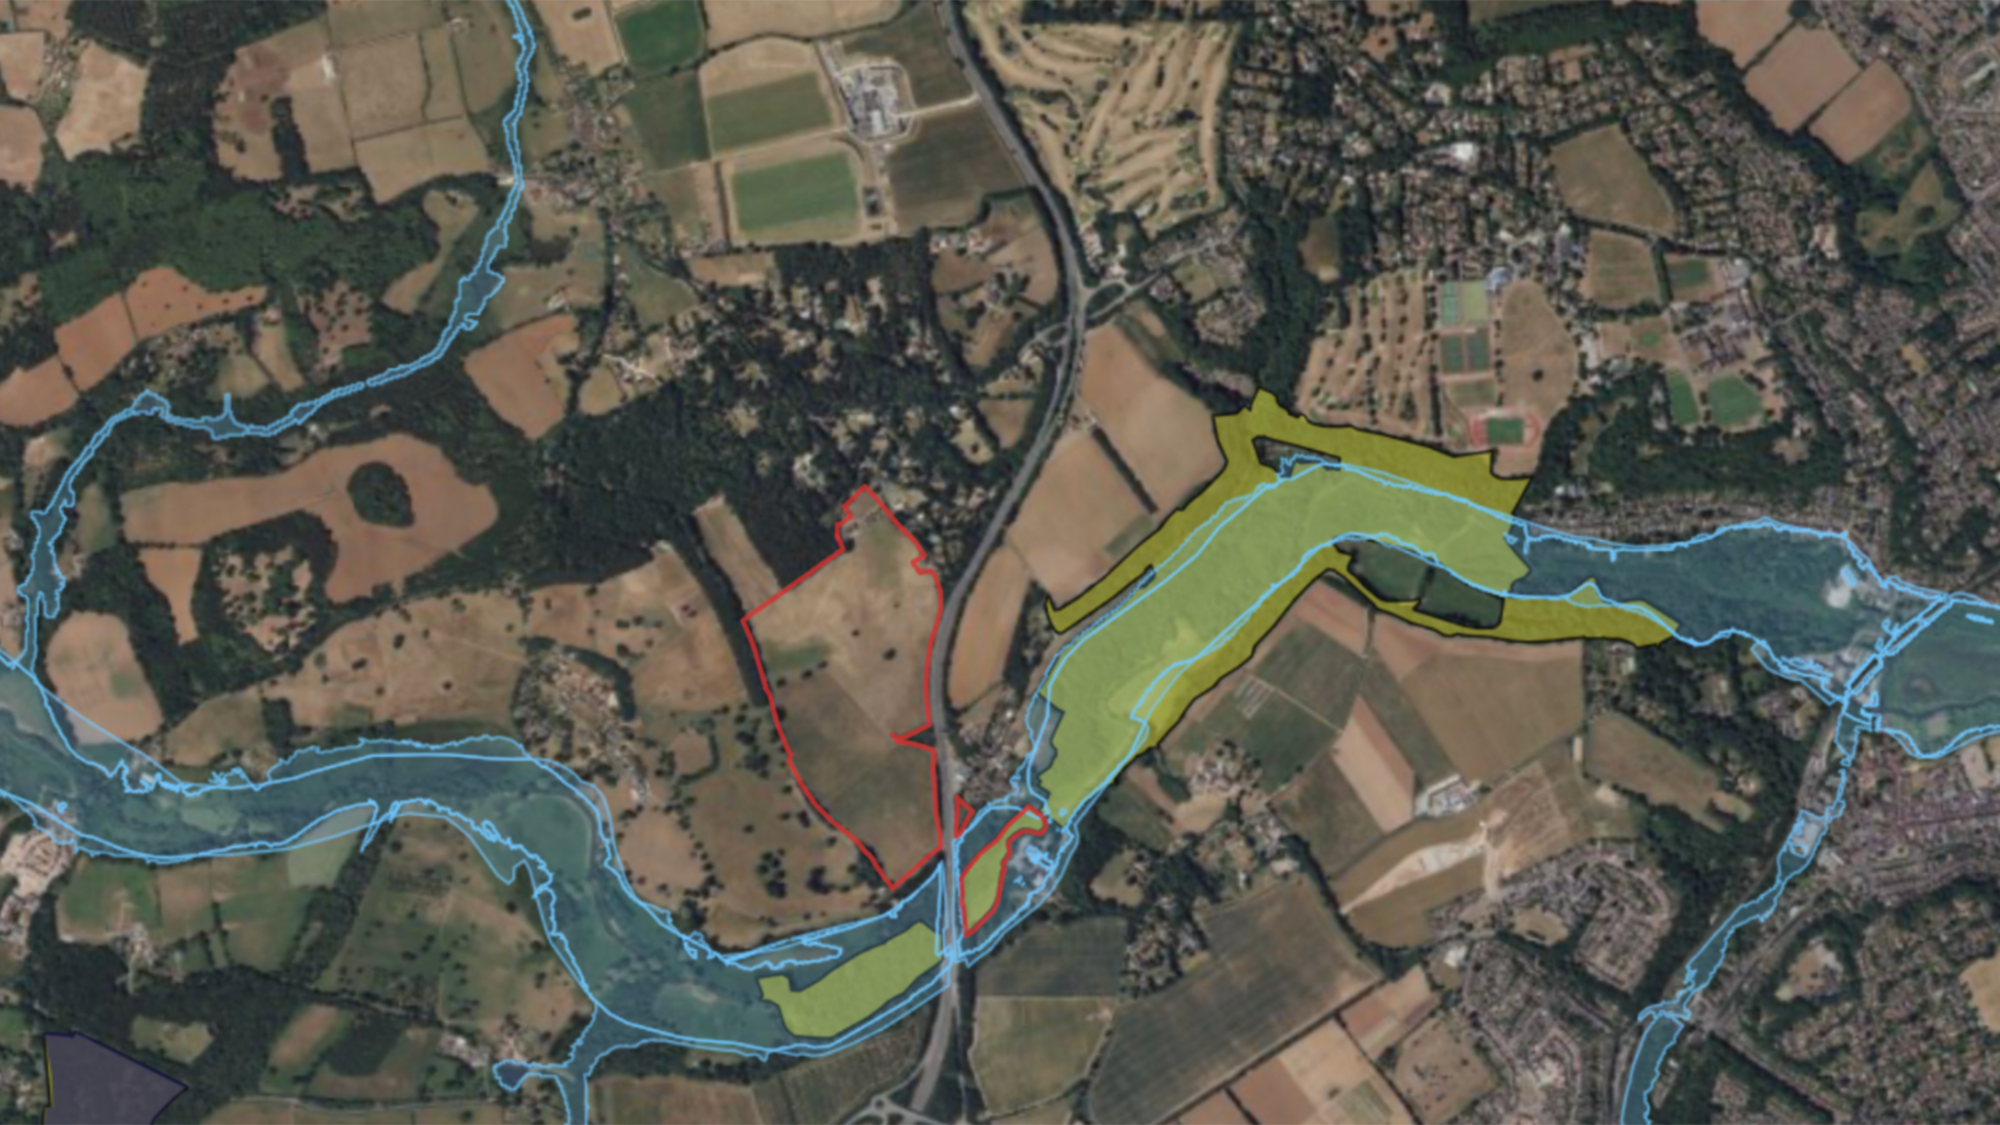 Red line ownership boundary of Norney Farm, Surrey, overlayed with two geospatial data